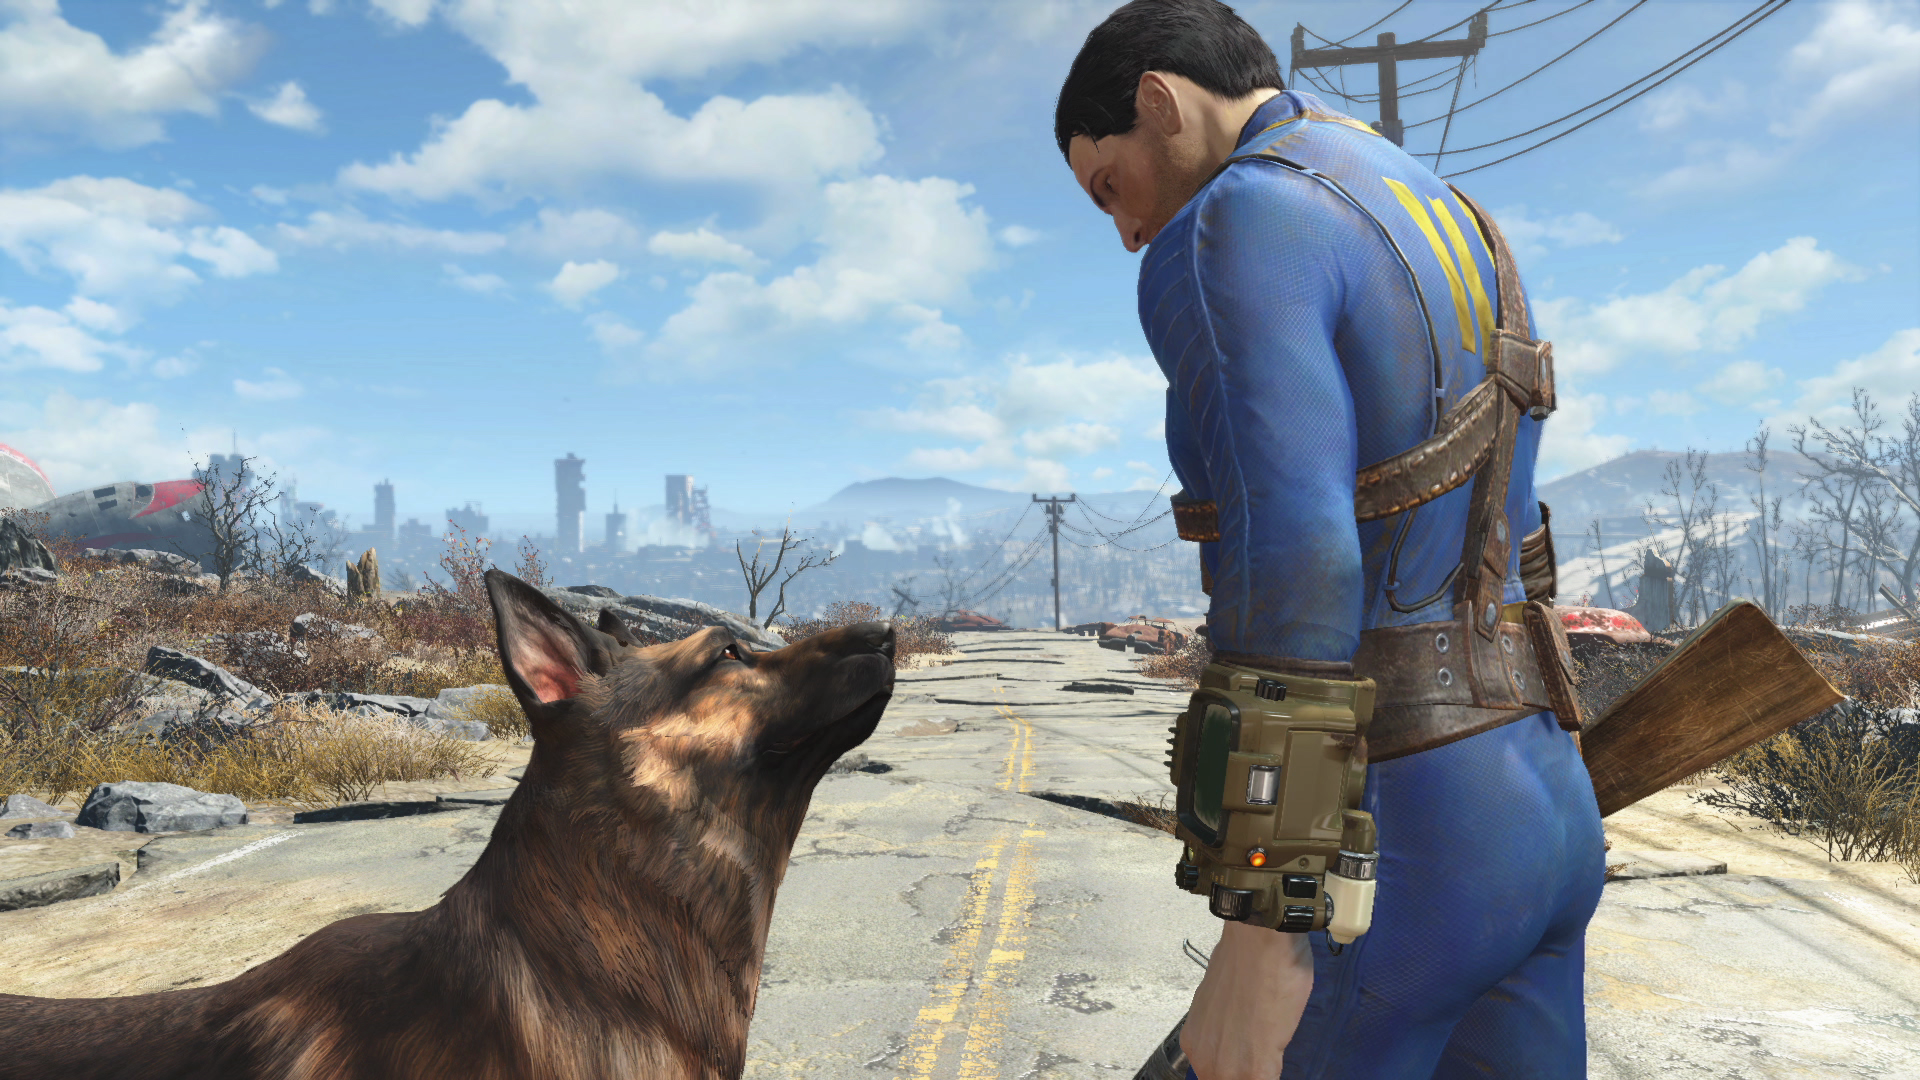 General 1920x1080 Fallout Fallout 4 video games PC gaming video game characters dog animals mammals apocalyptic